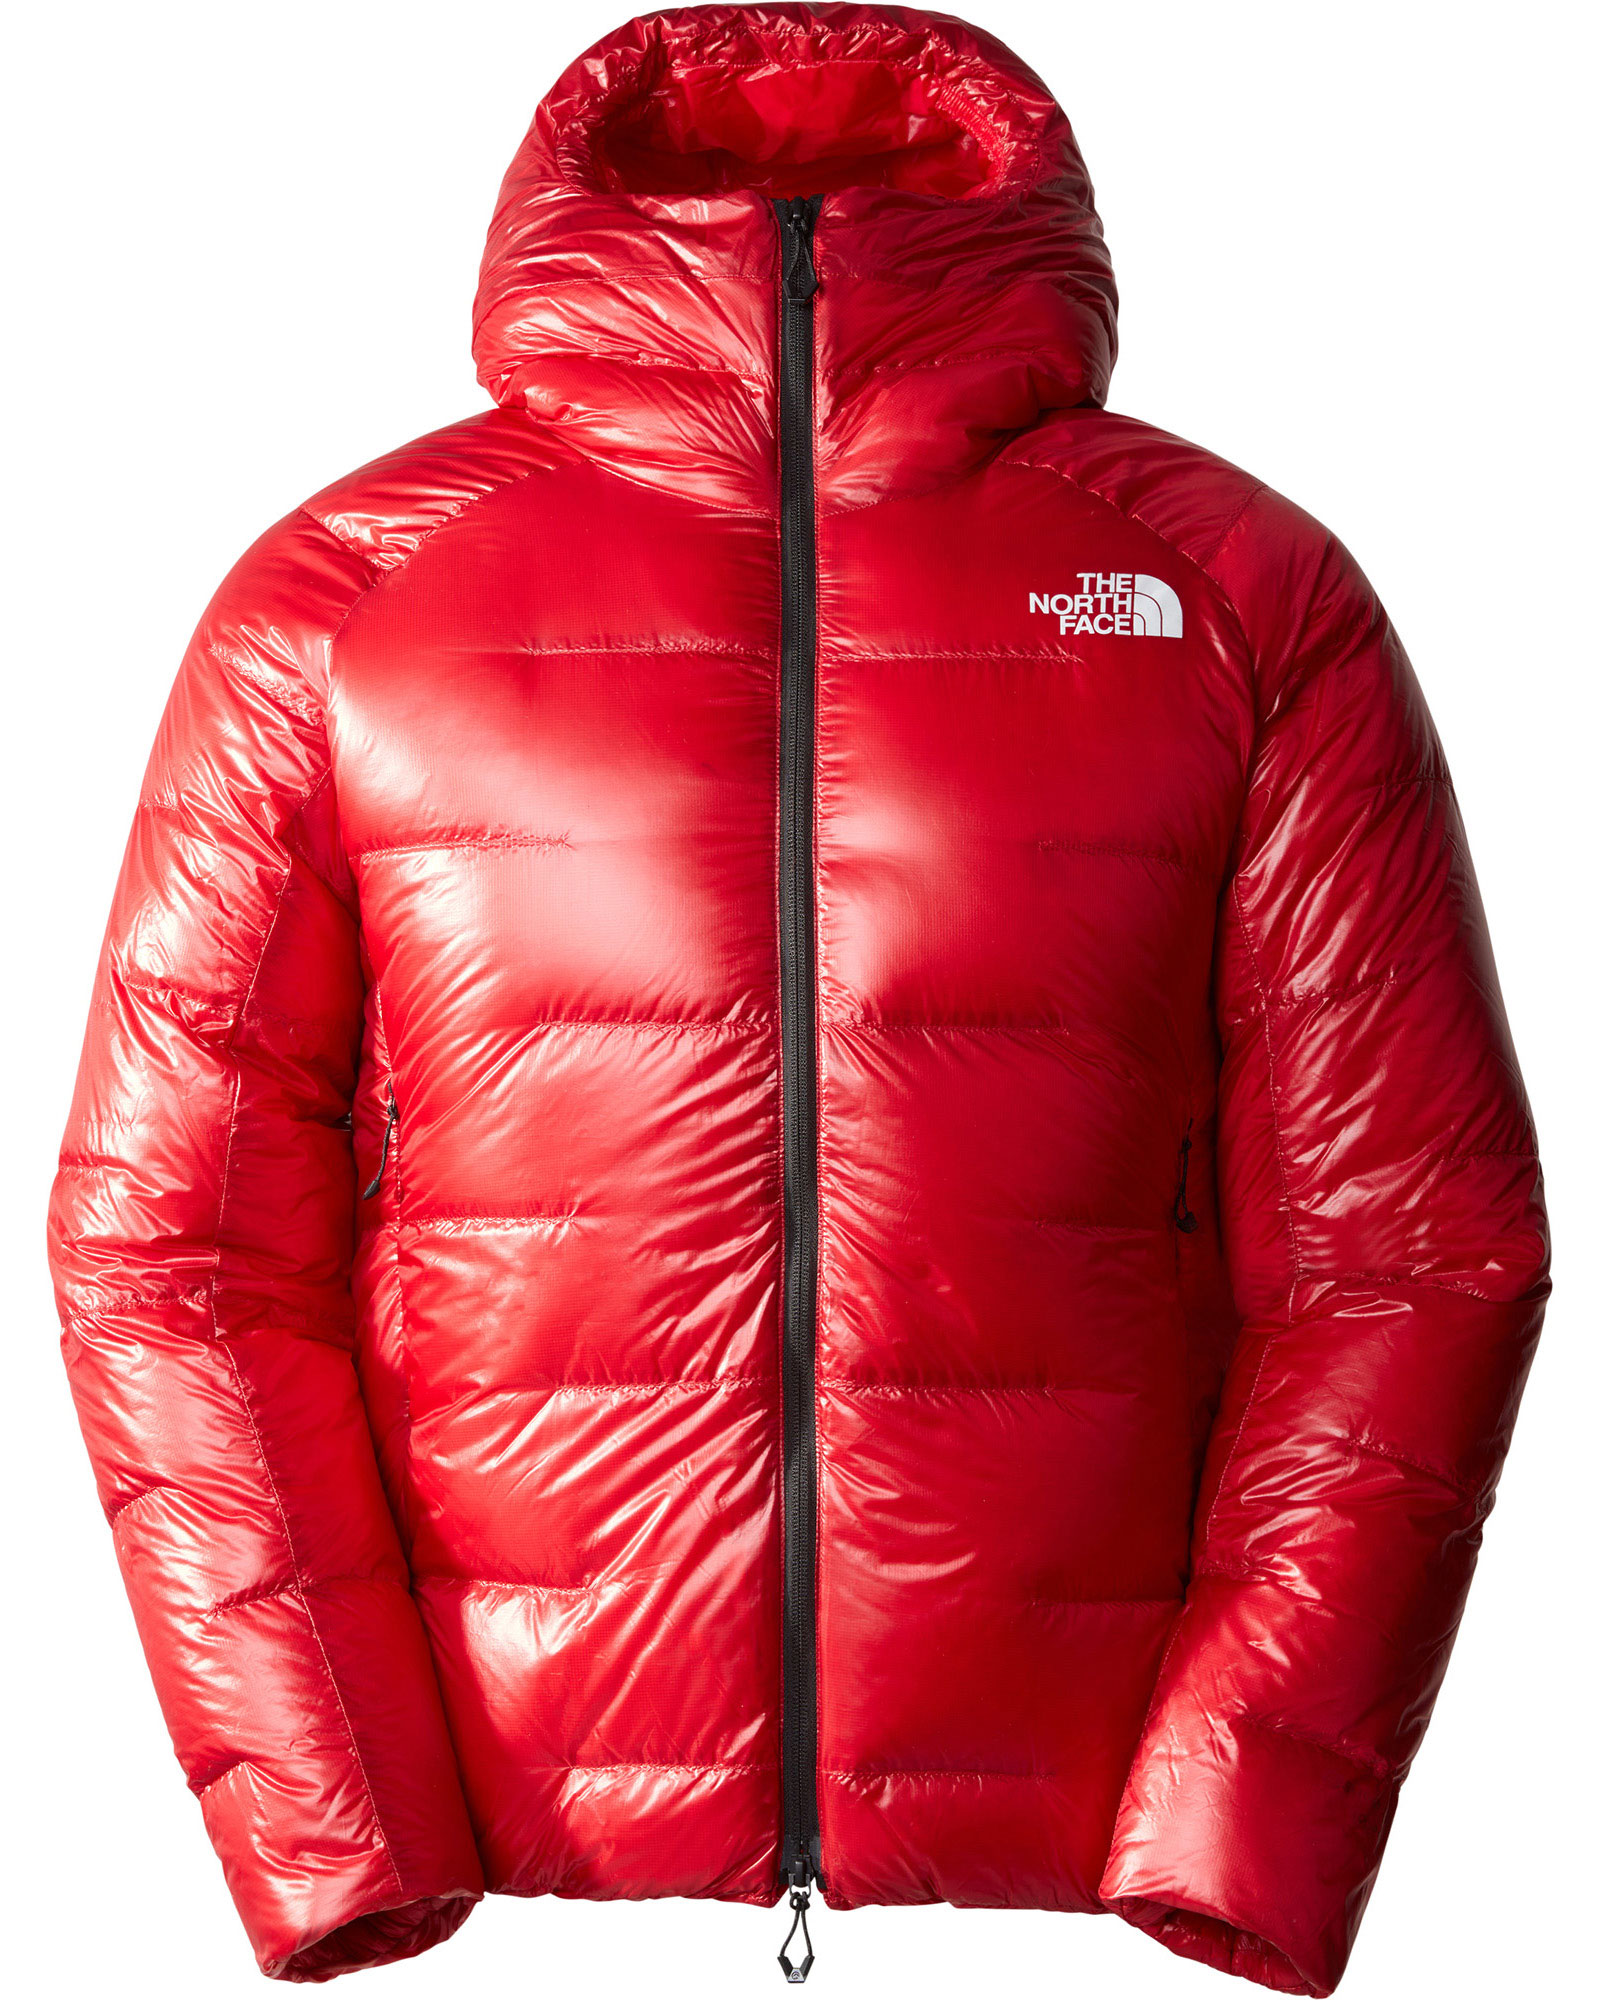 The North Face Summit Pumori Women’s Down Parka Jacket - TNF Red M